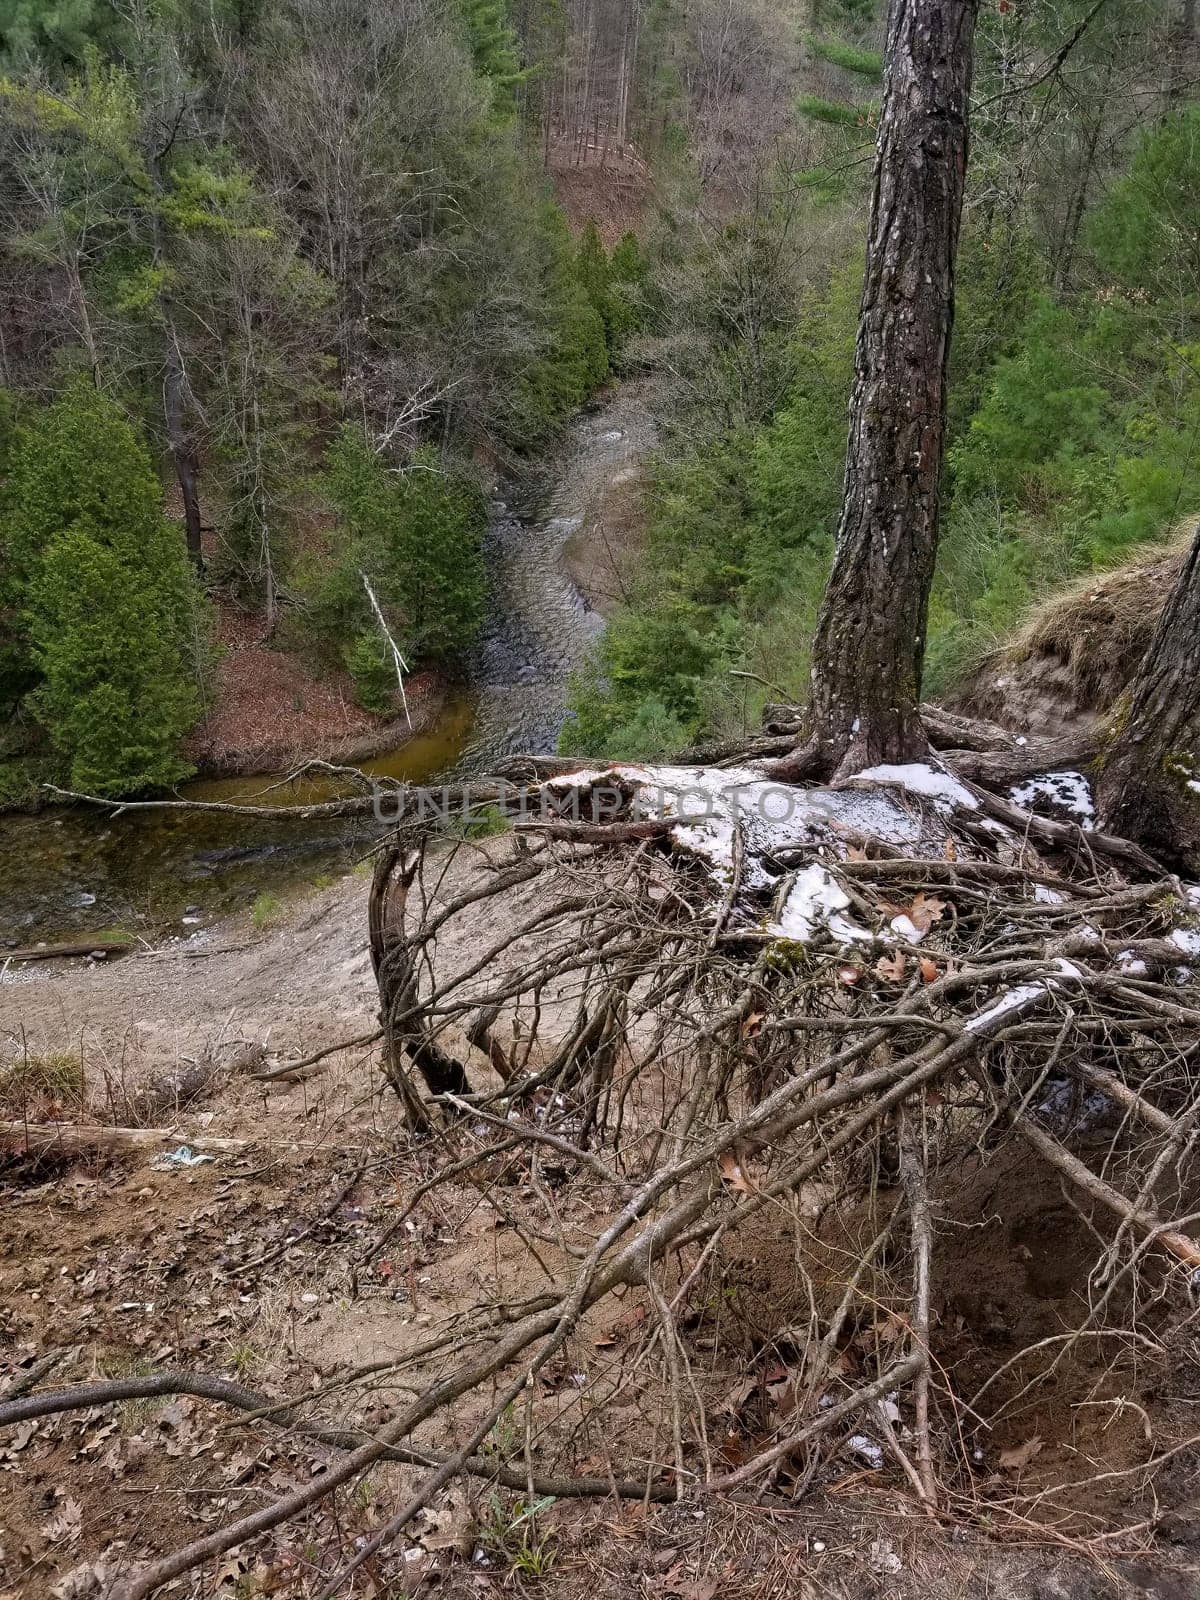 Severe Erosion along steep ravine above a river reveal the root systems of pine trees dusted in snow